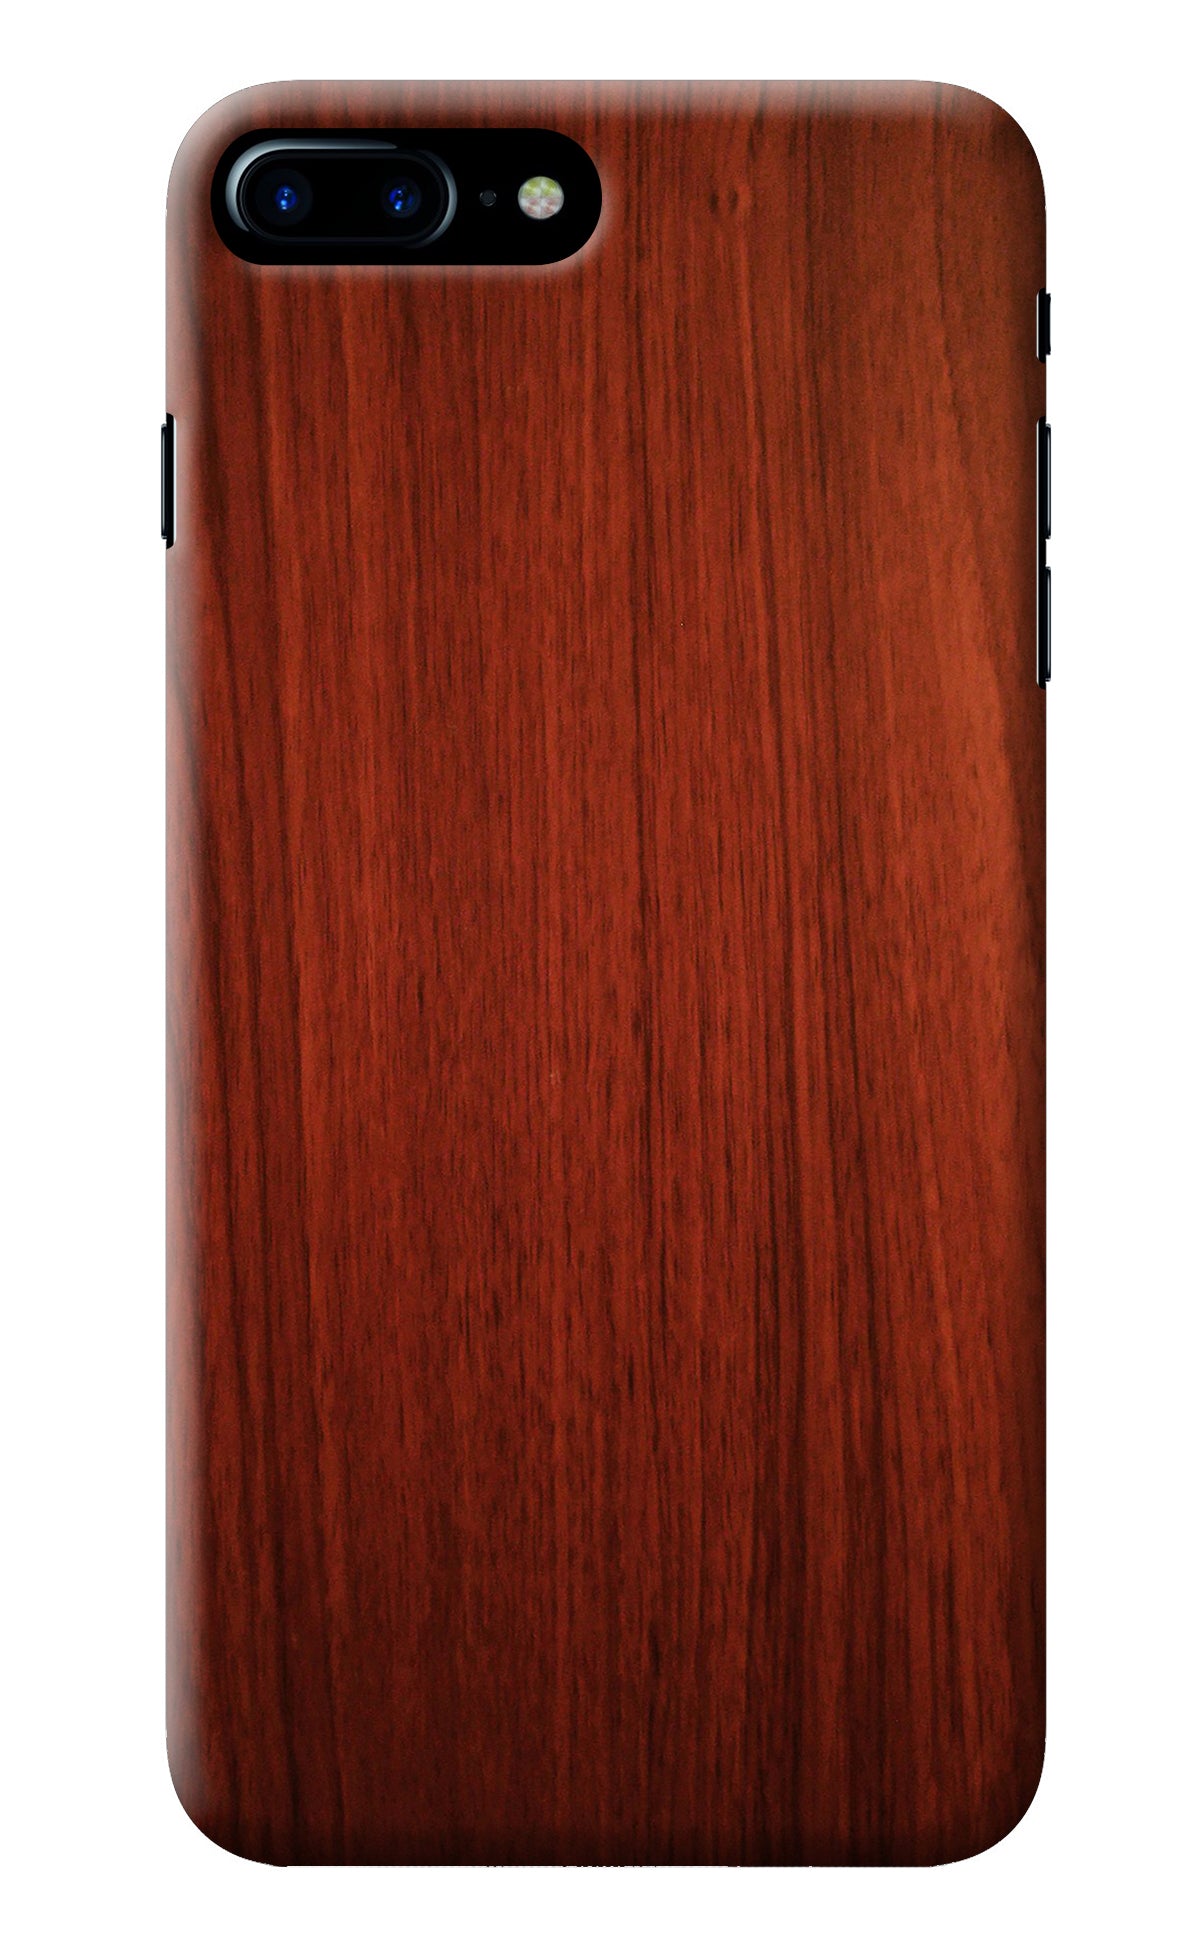 Wooden Plain Pattern iPhone 7 Plus Back Cover